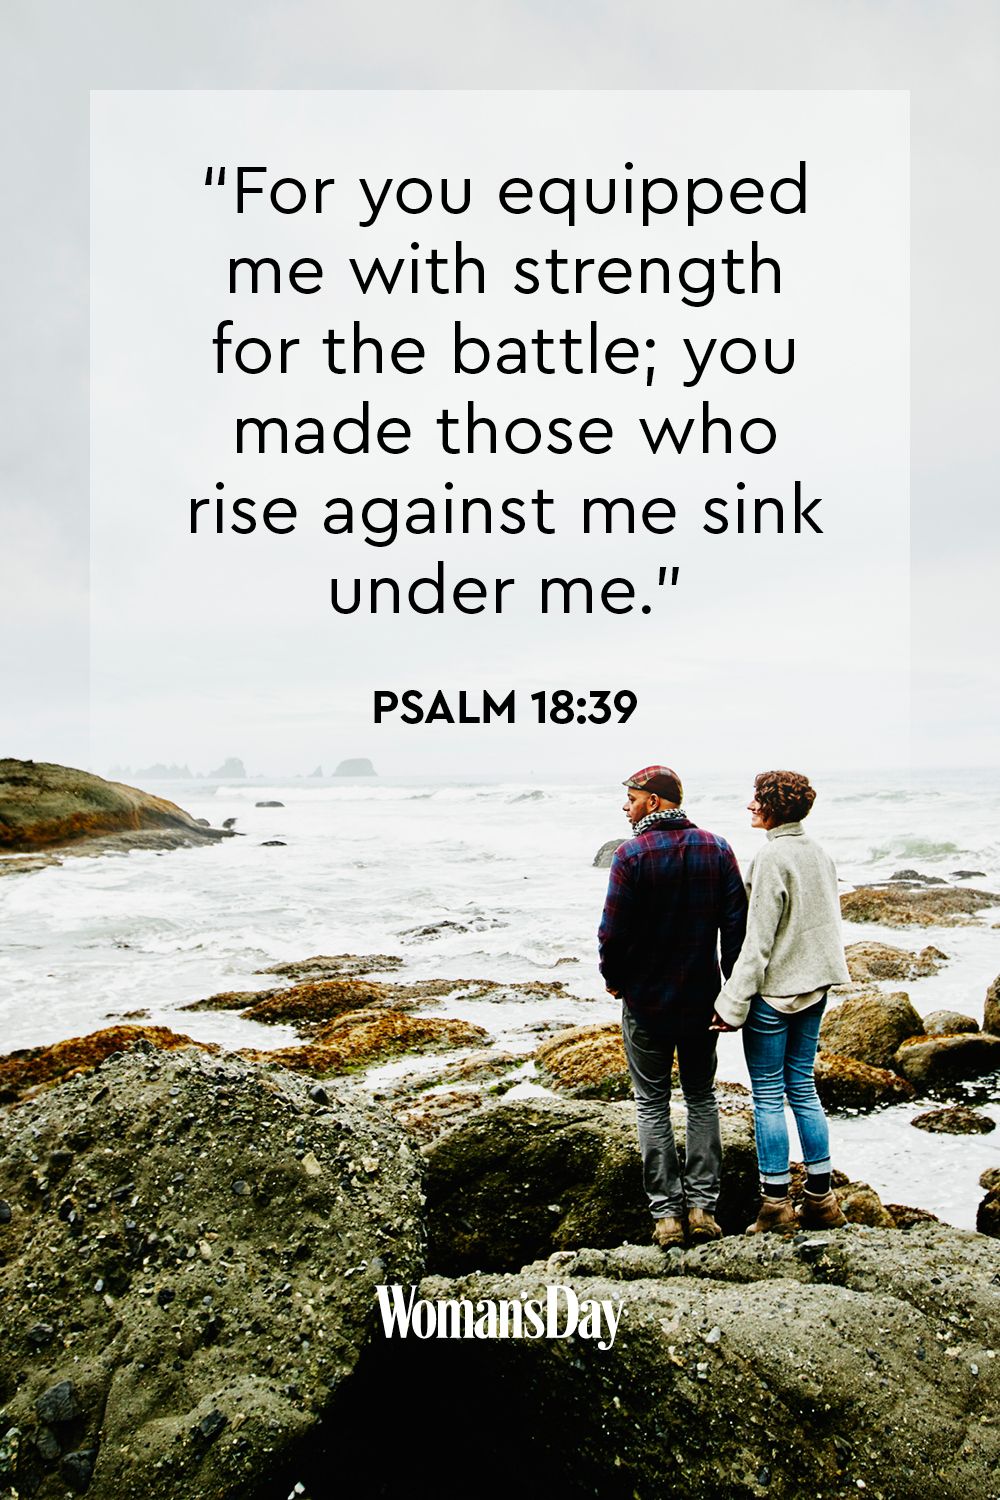 bible verse about strength in community